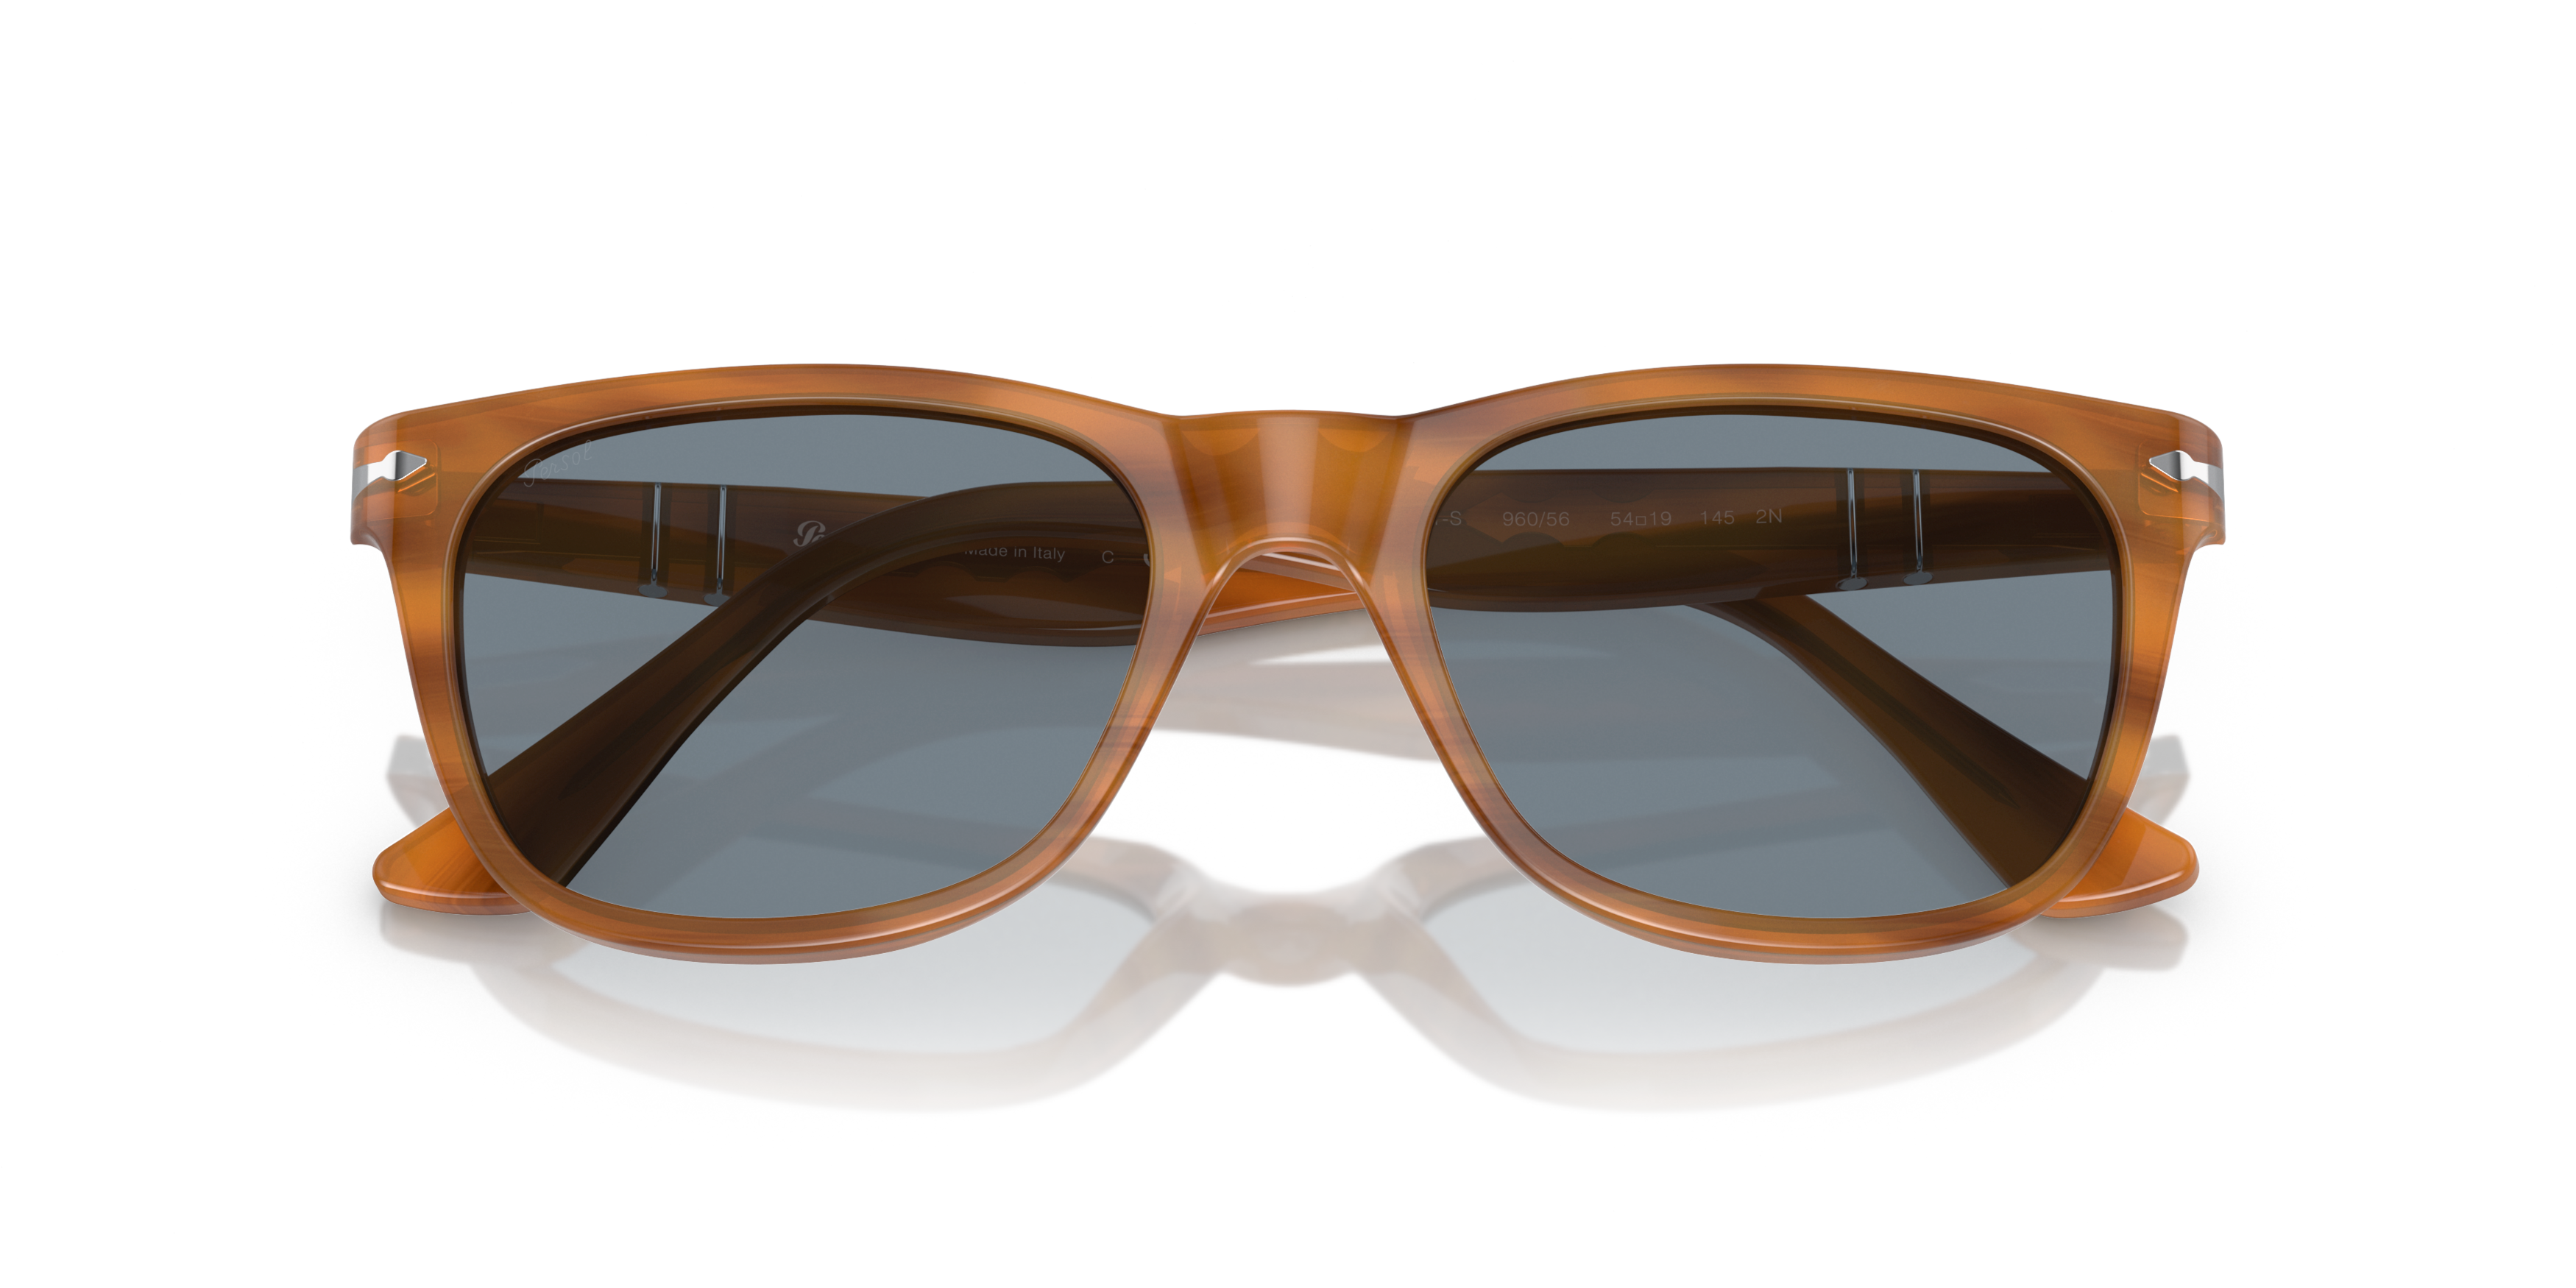 [products.image.folded] Persol PO3291S 960/56